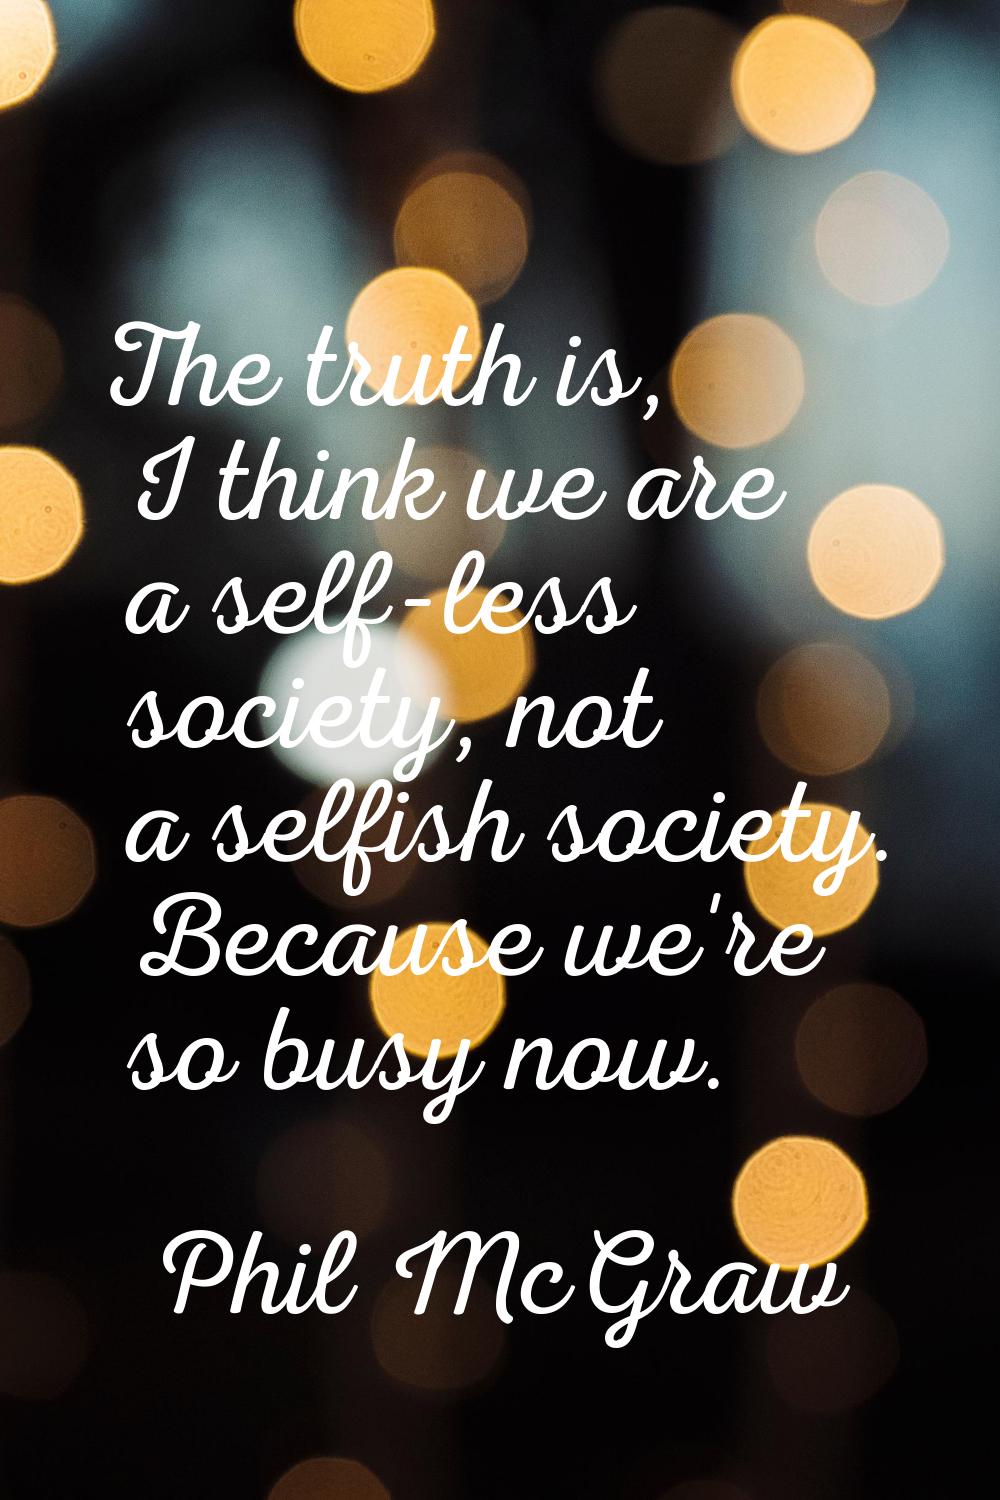 The truth is, I think we are a self-less society, not a selfish society. Because we're so busy now.